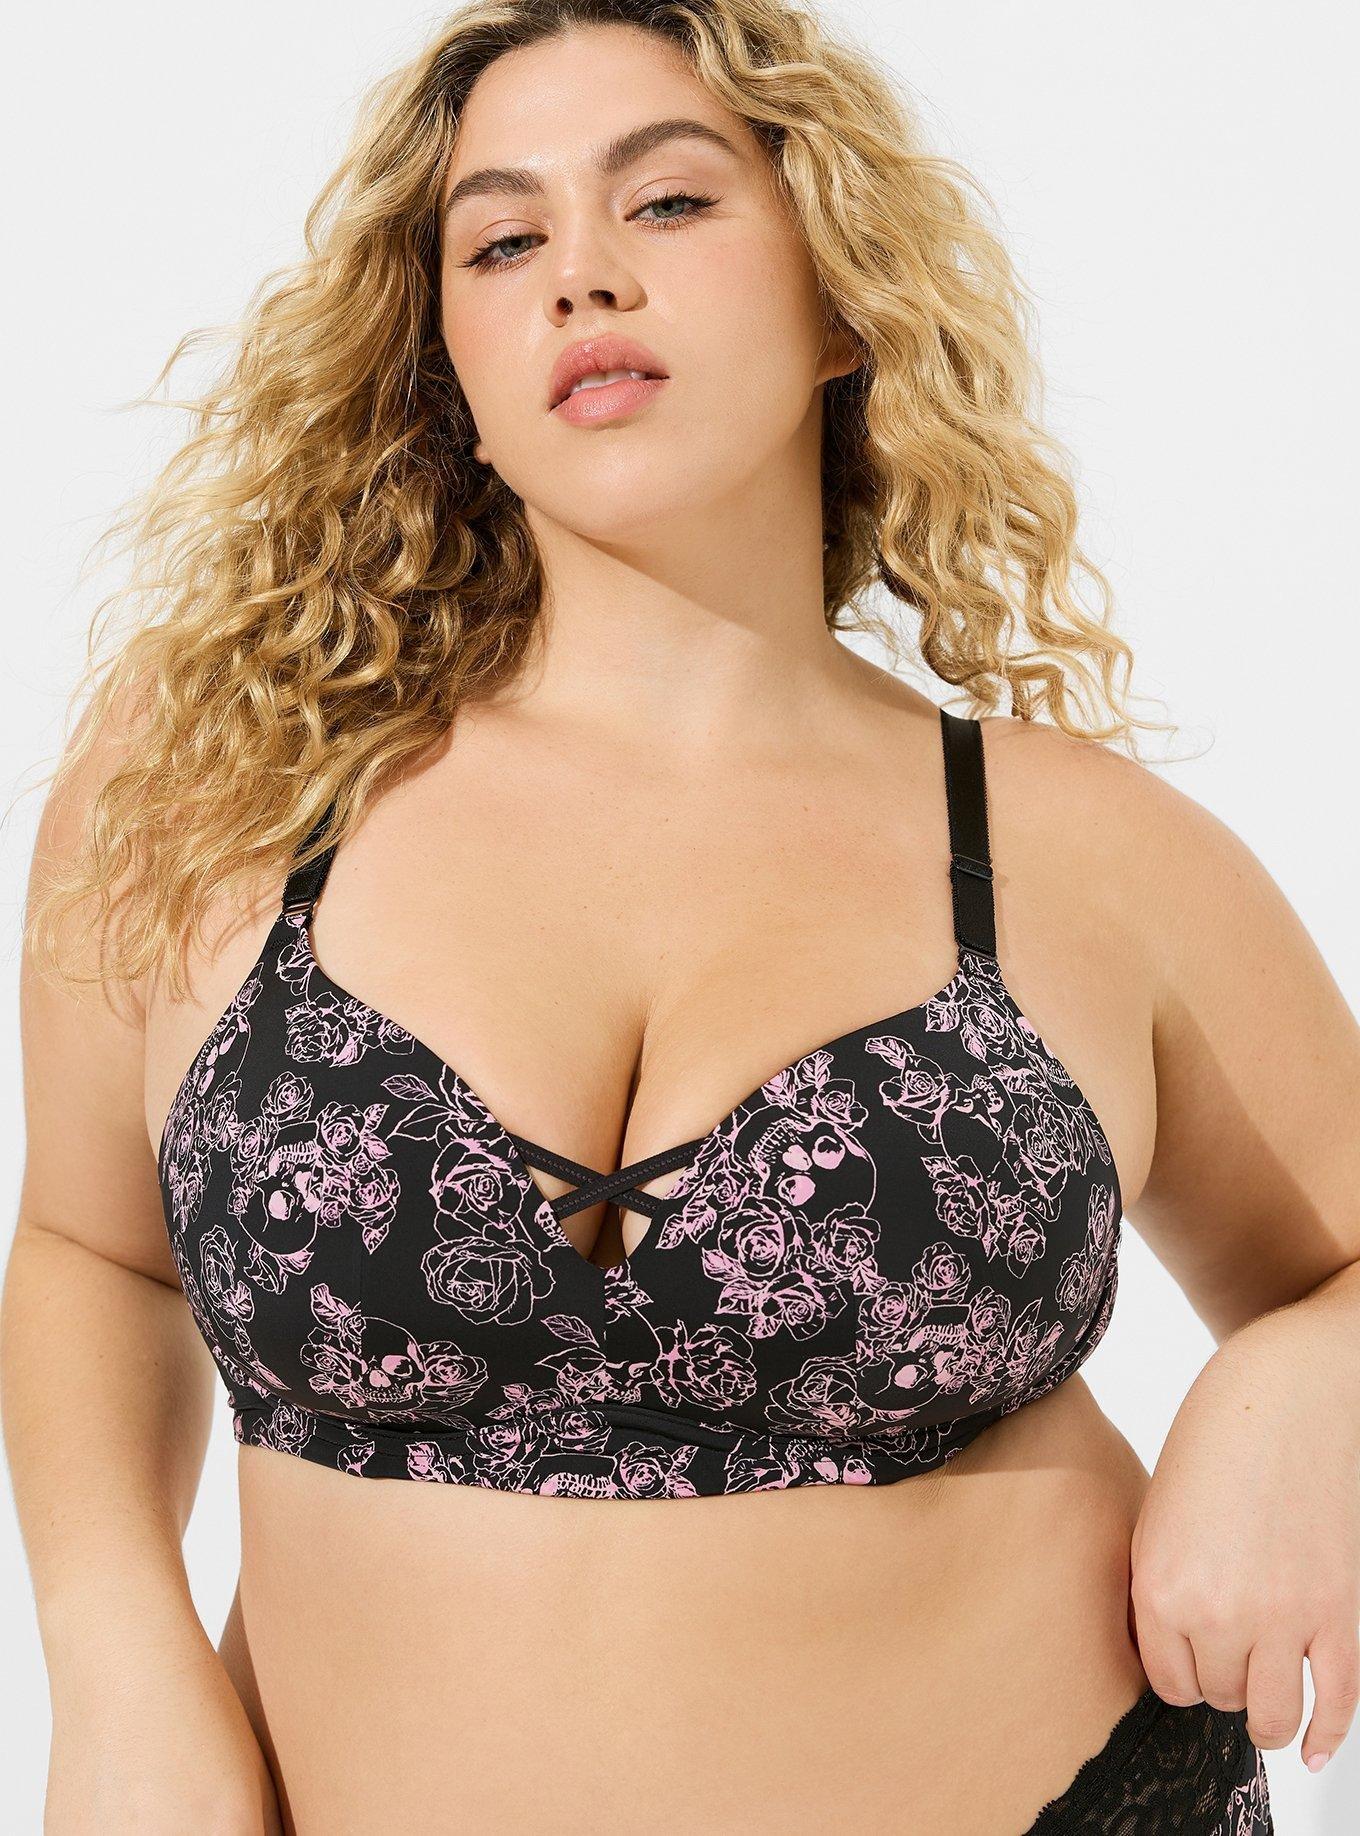 New with Tags $60 Cacique Bra & Panty Set (Bra: 40DDD Panty: 18/20